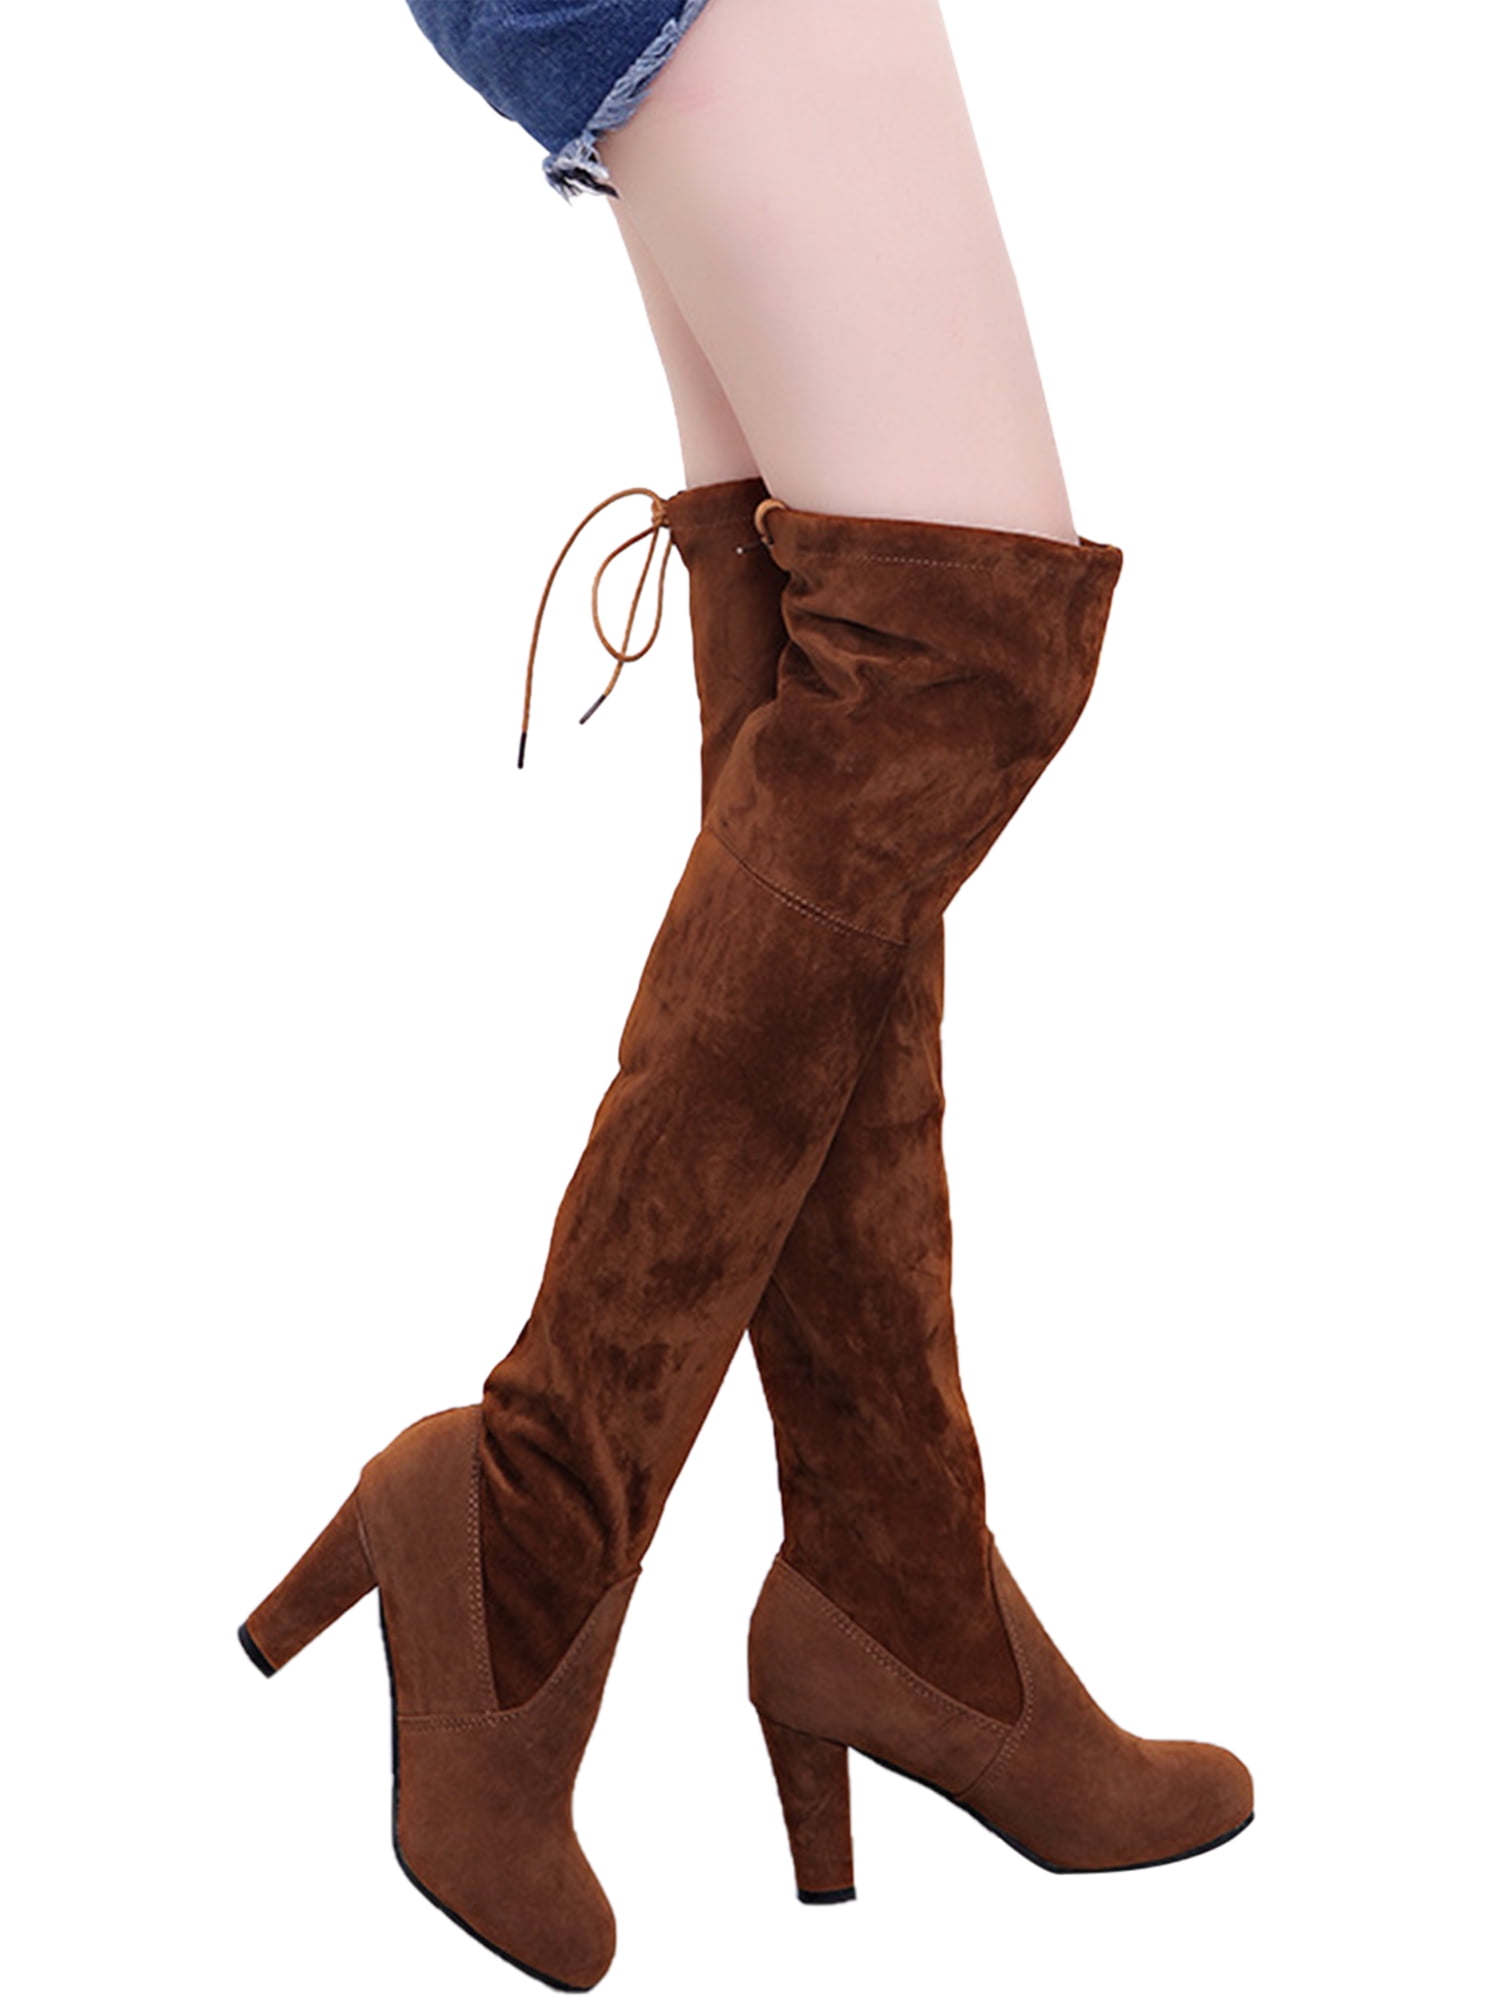 New Womens Ladies Mens Thigh High Over The Knee High Heel Stretch Boots SIZ 3-12